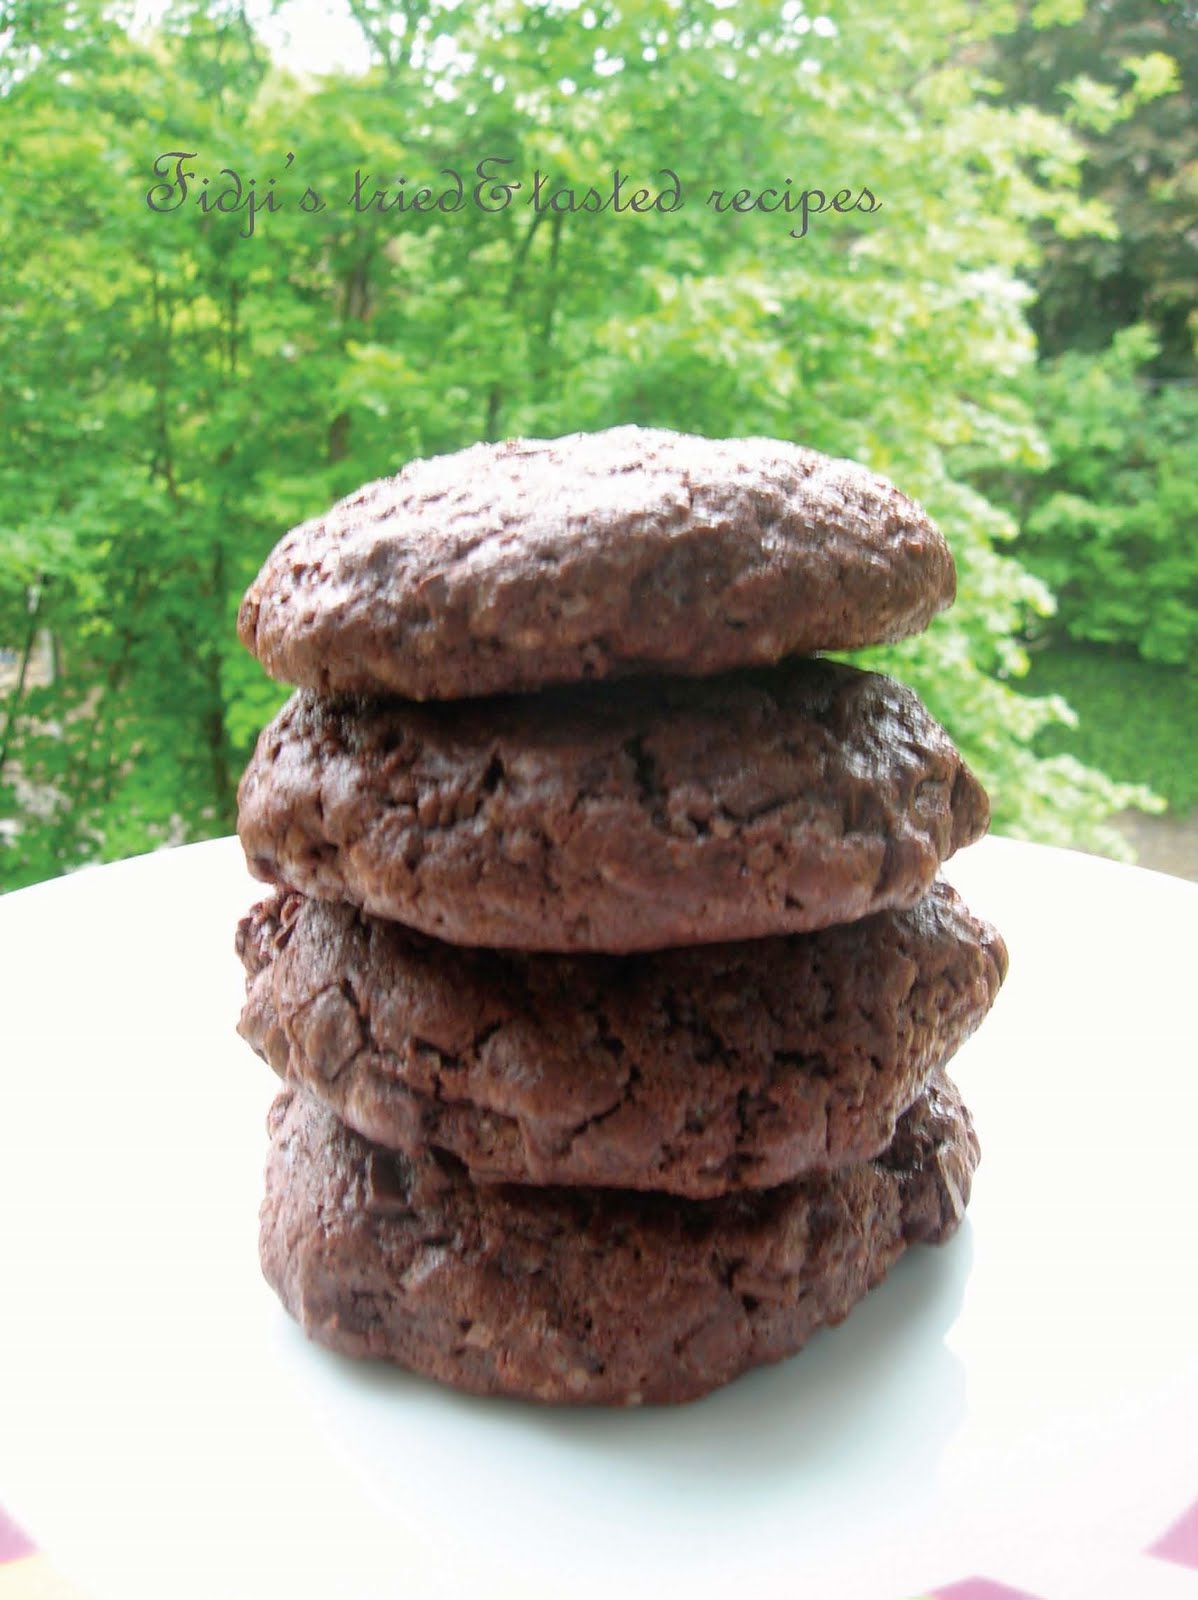 Fidji's Tried & Tasted Recipes: Double or Triple Chocolate Cookies